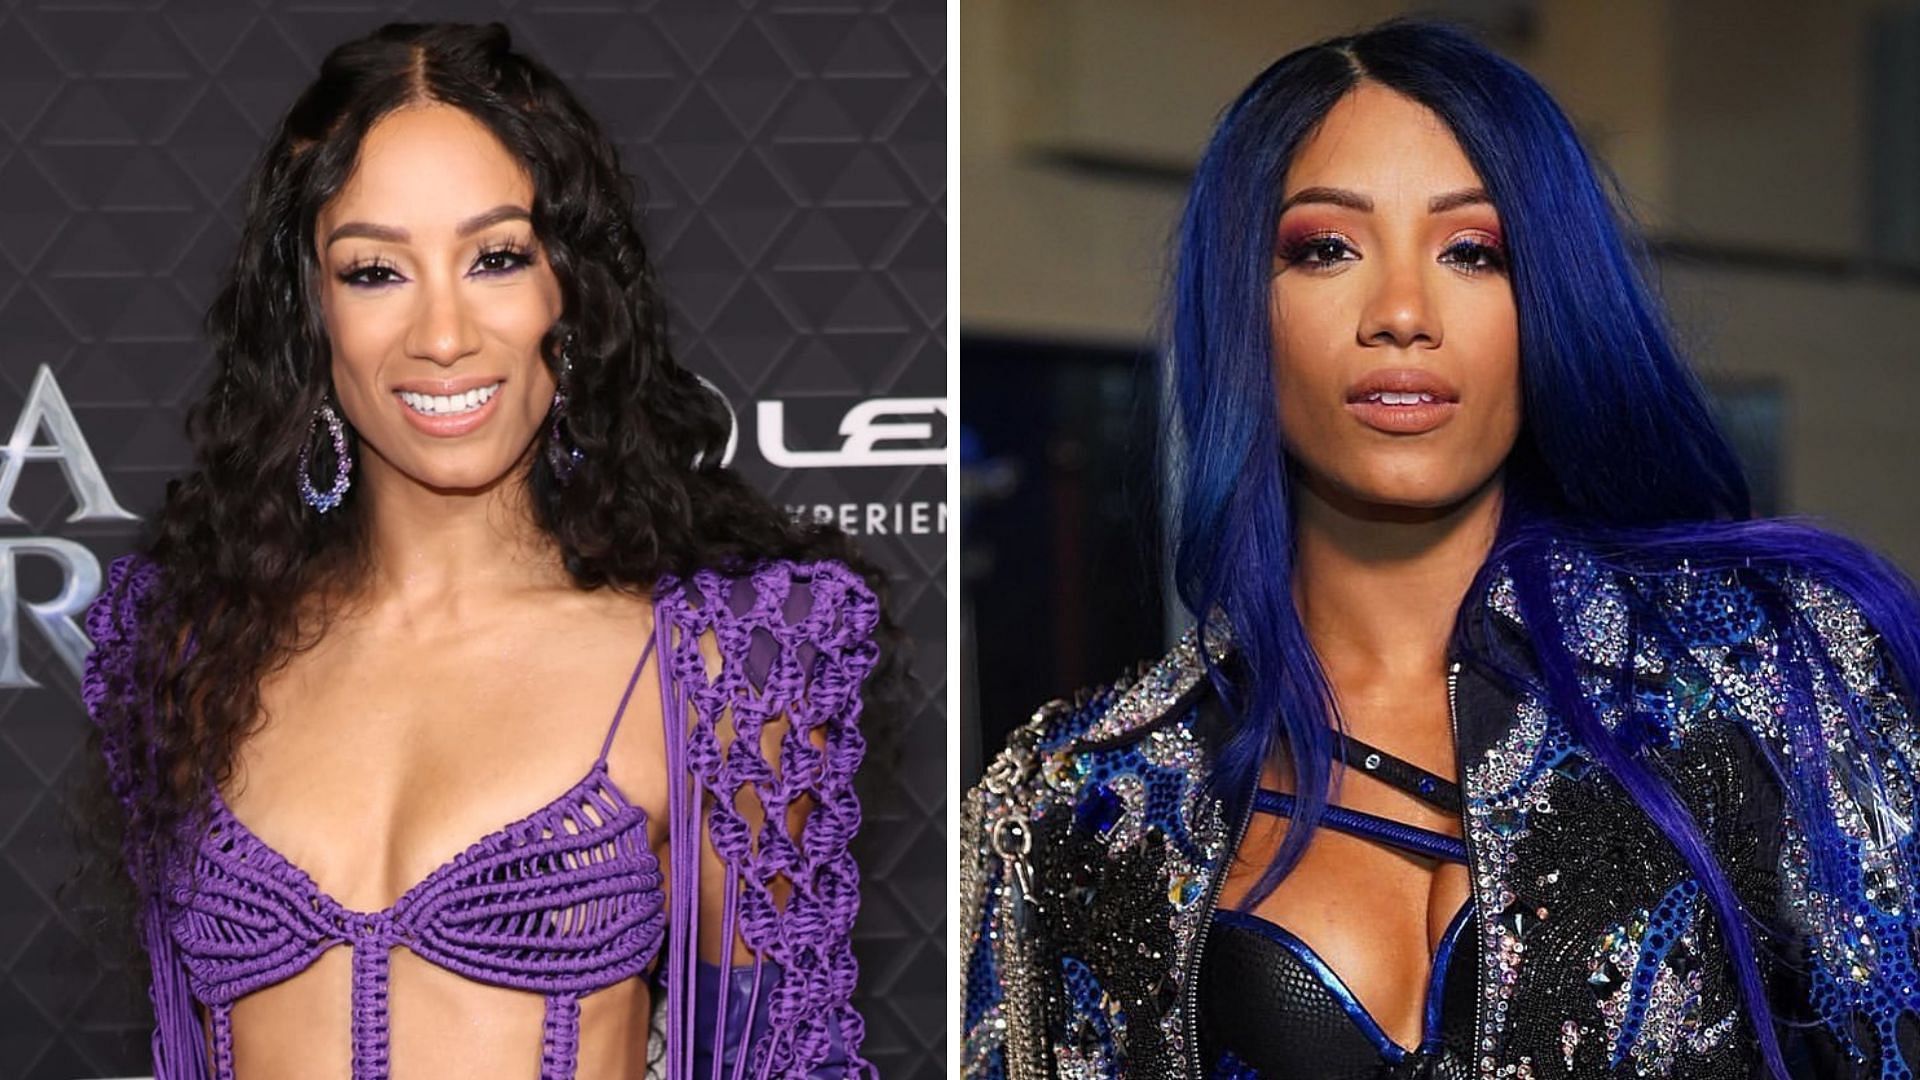 Sasha Banks recently wrapped up her first feature film